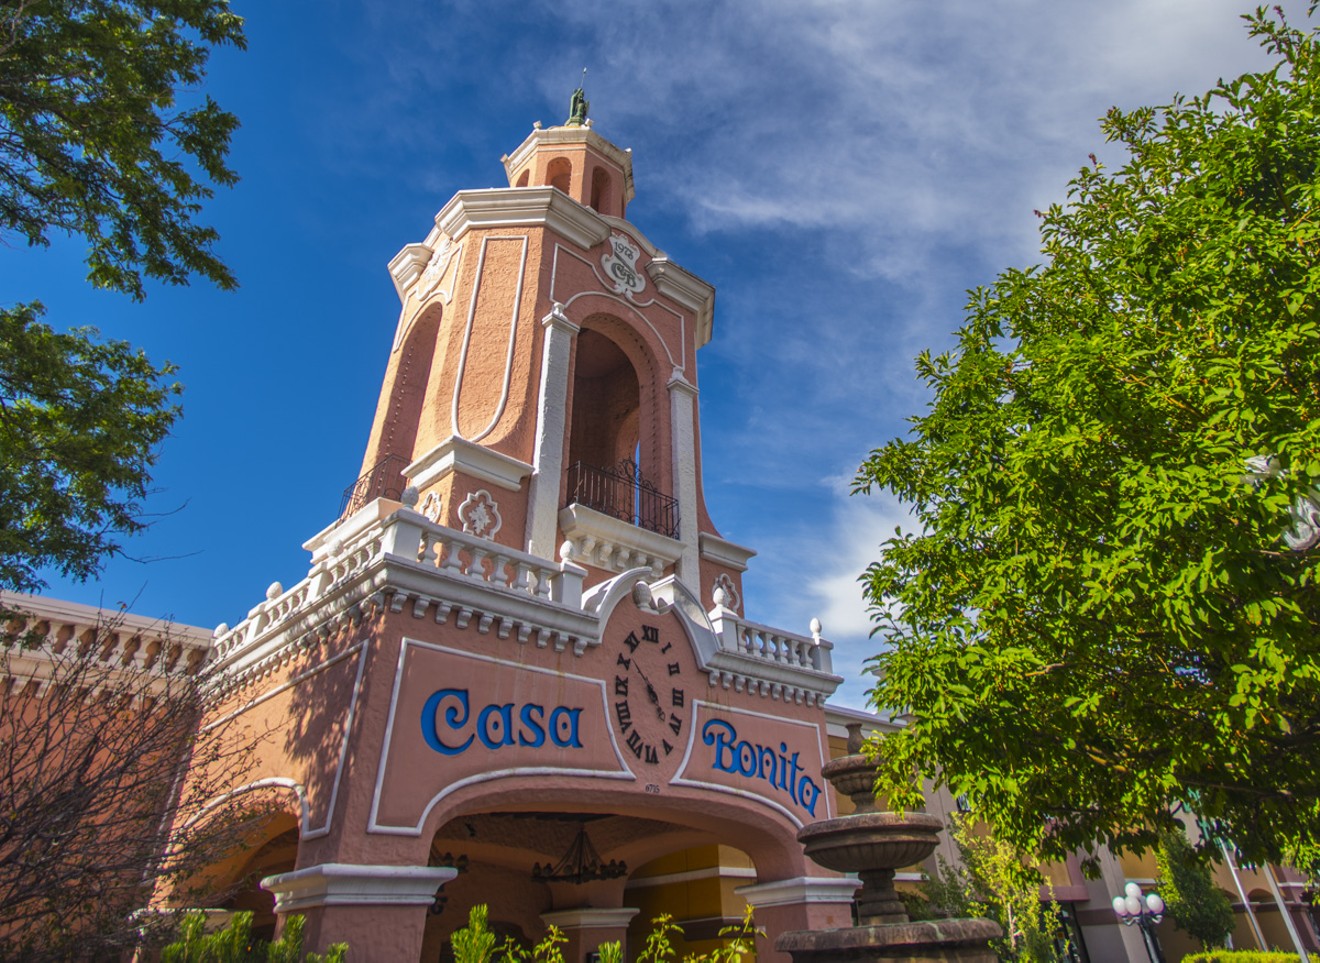 In case you're new to town, this is Casa Bonita.